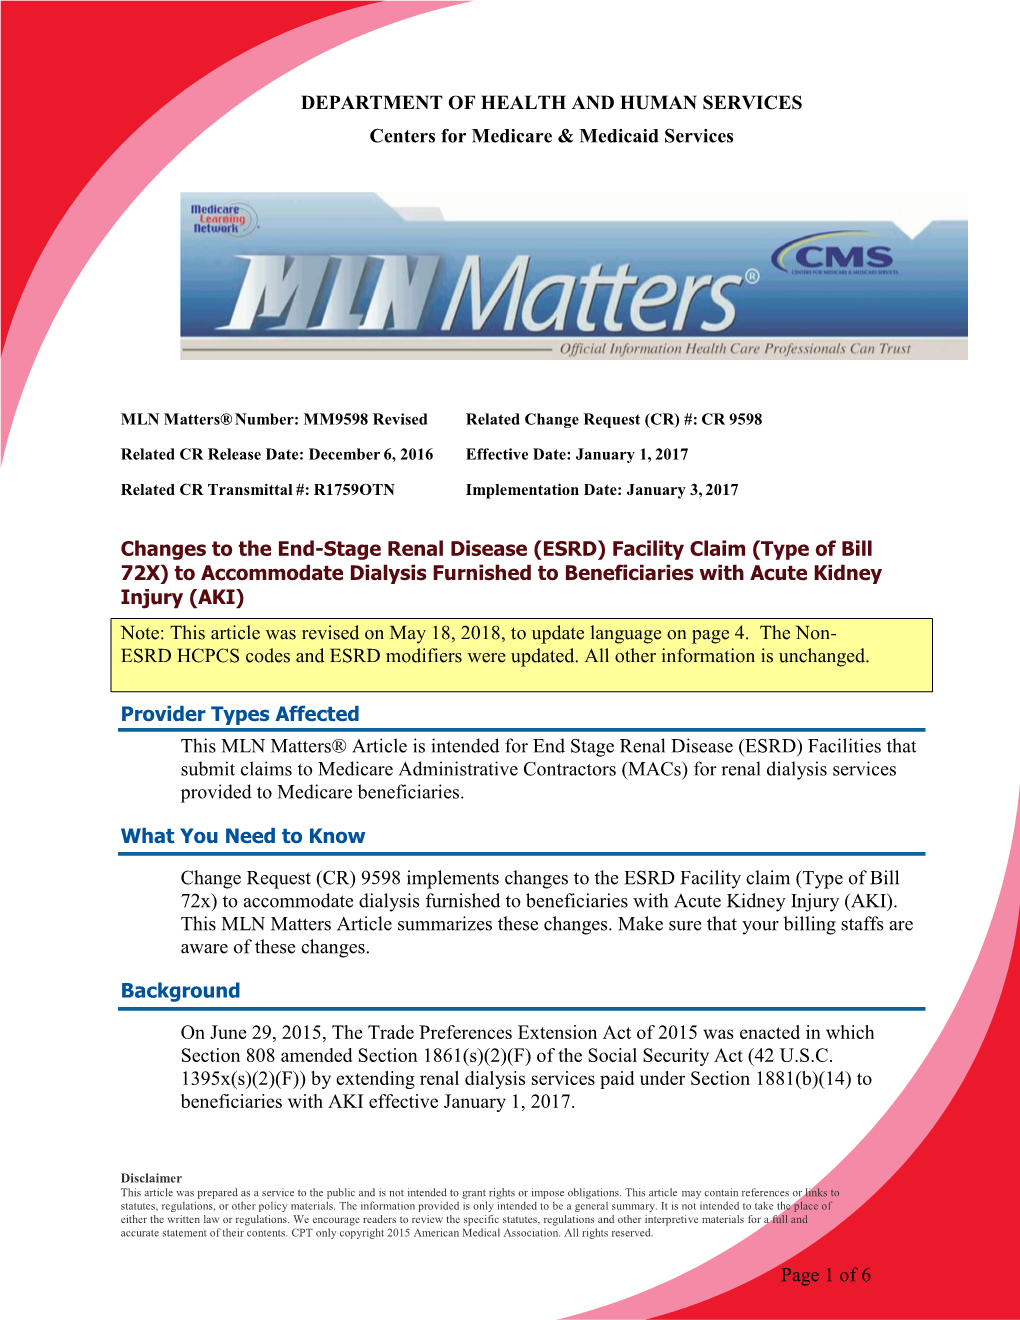 MLN Matters Article MM9598 Revised